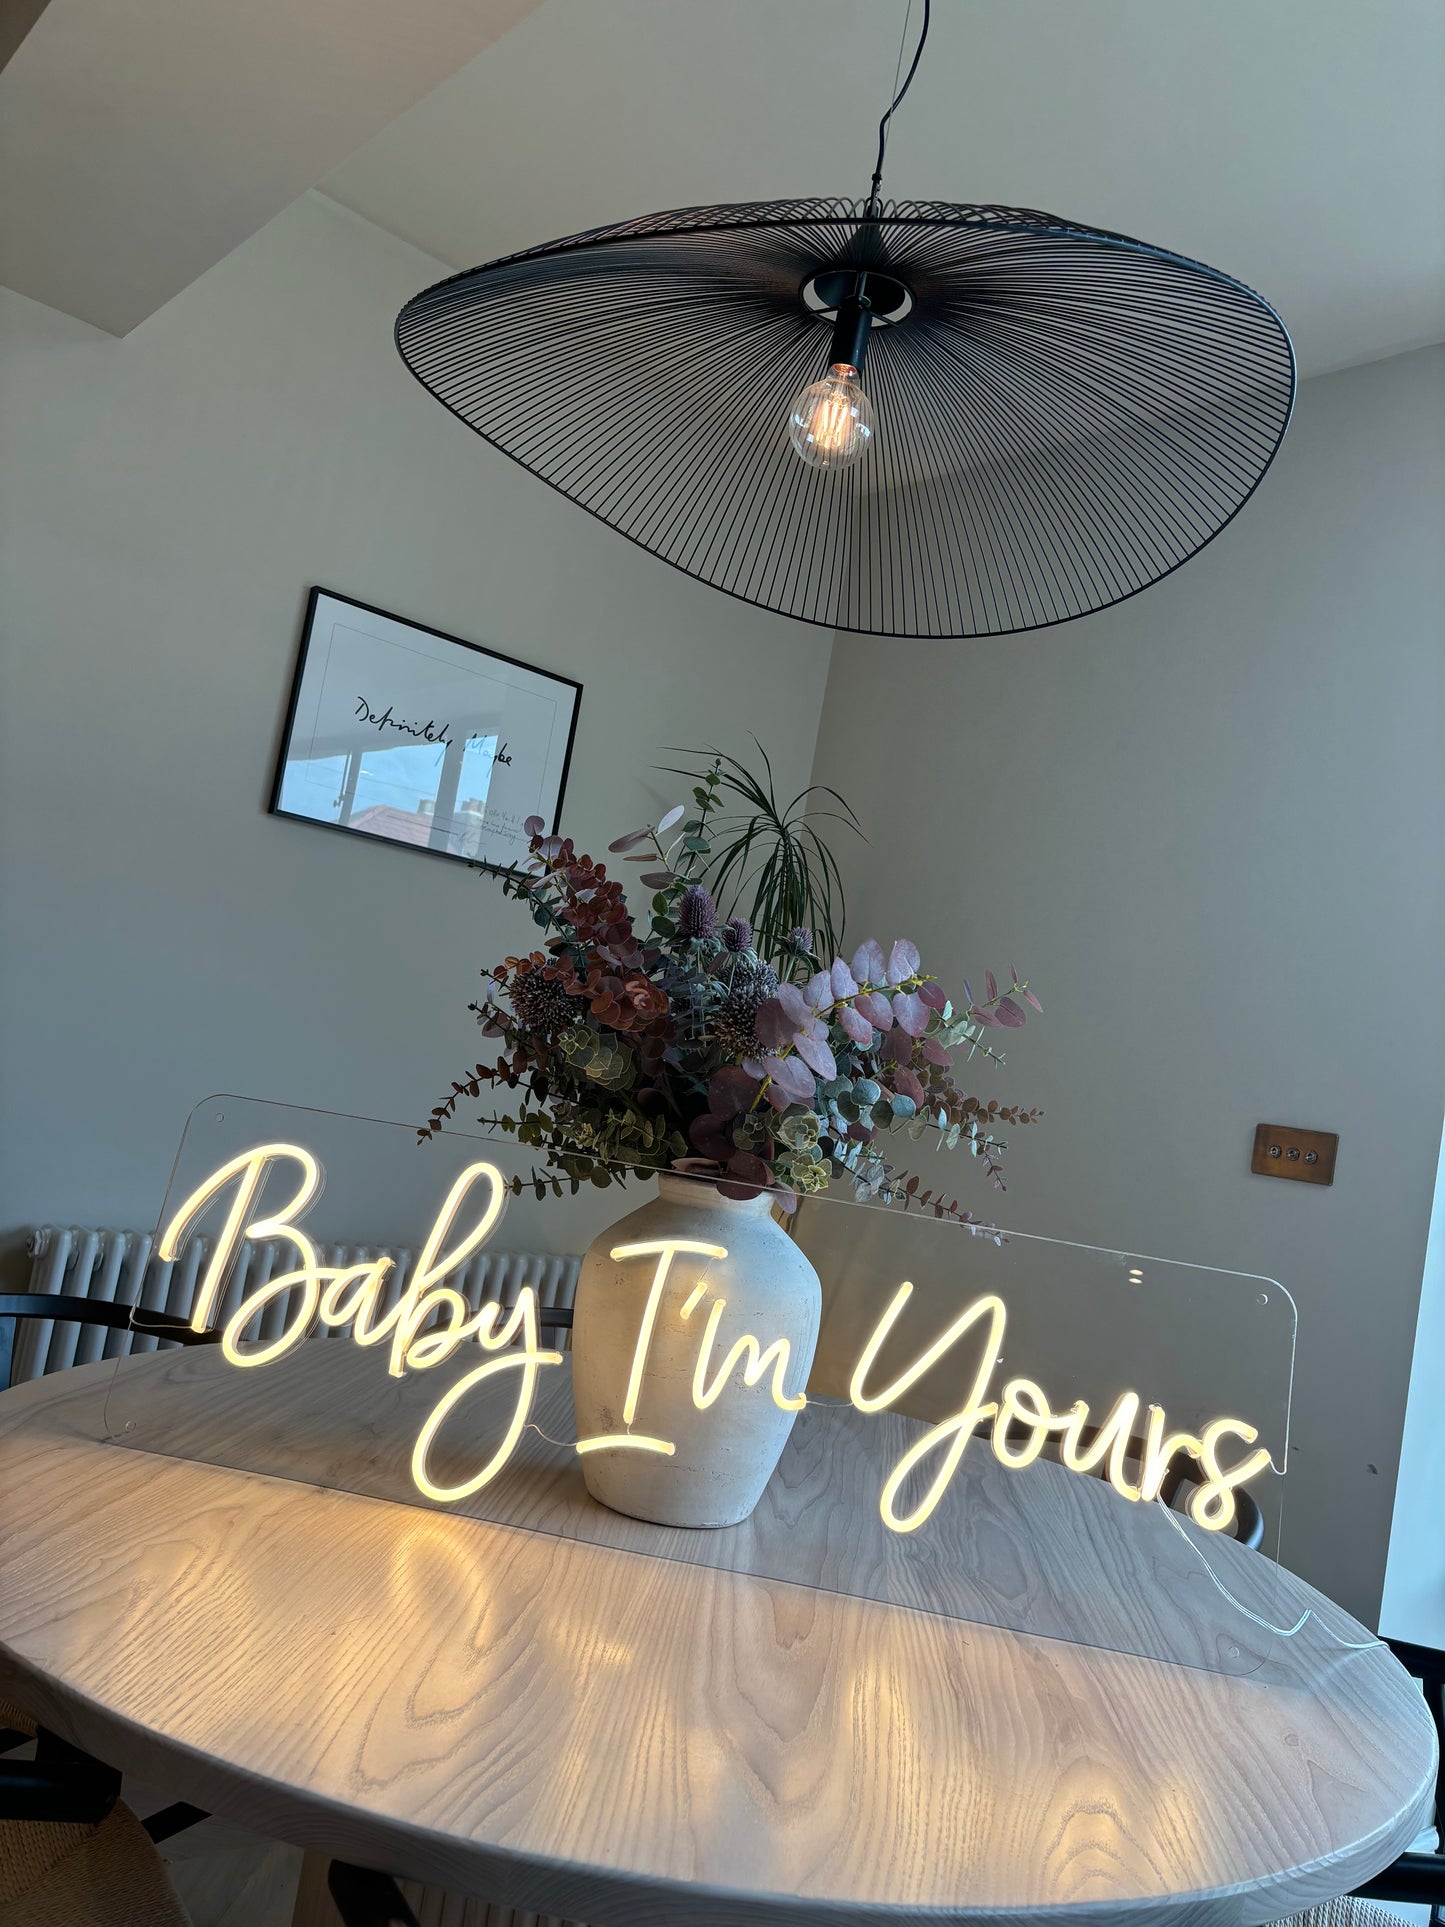 Baby I’m yours neon sign